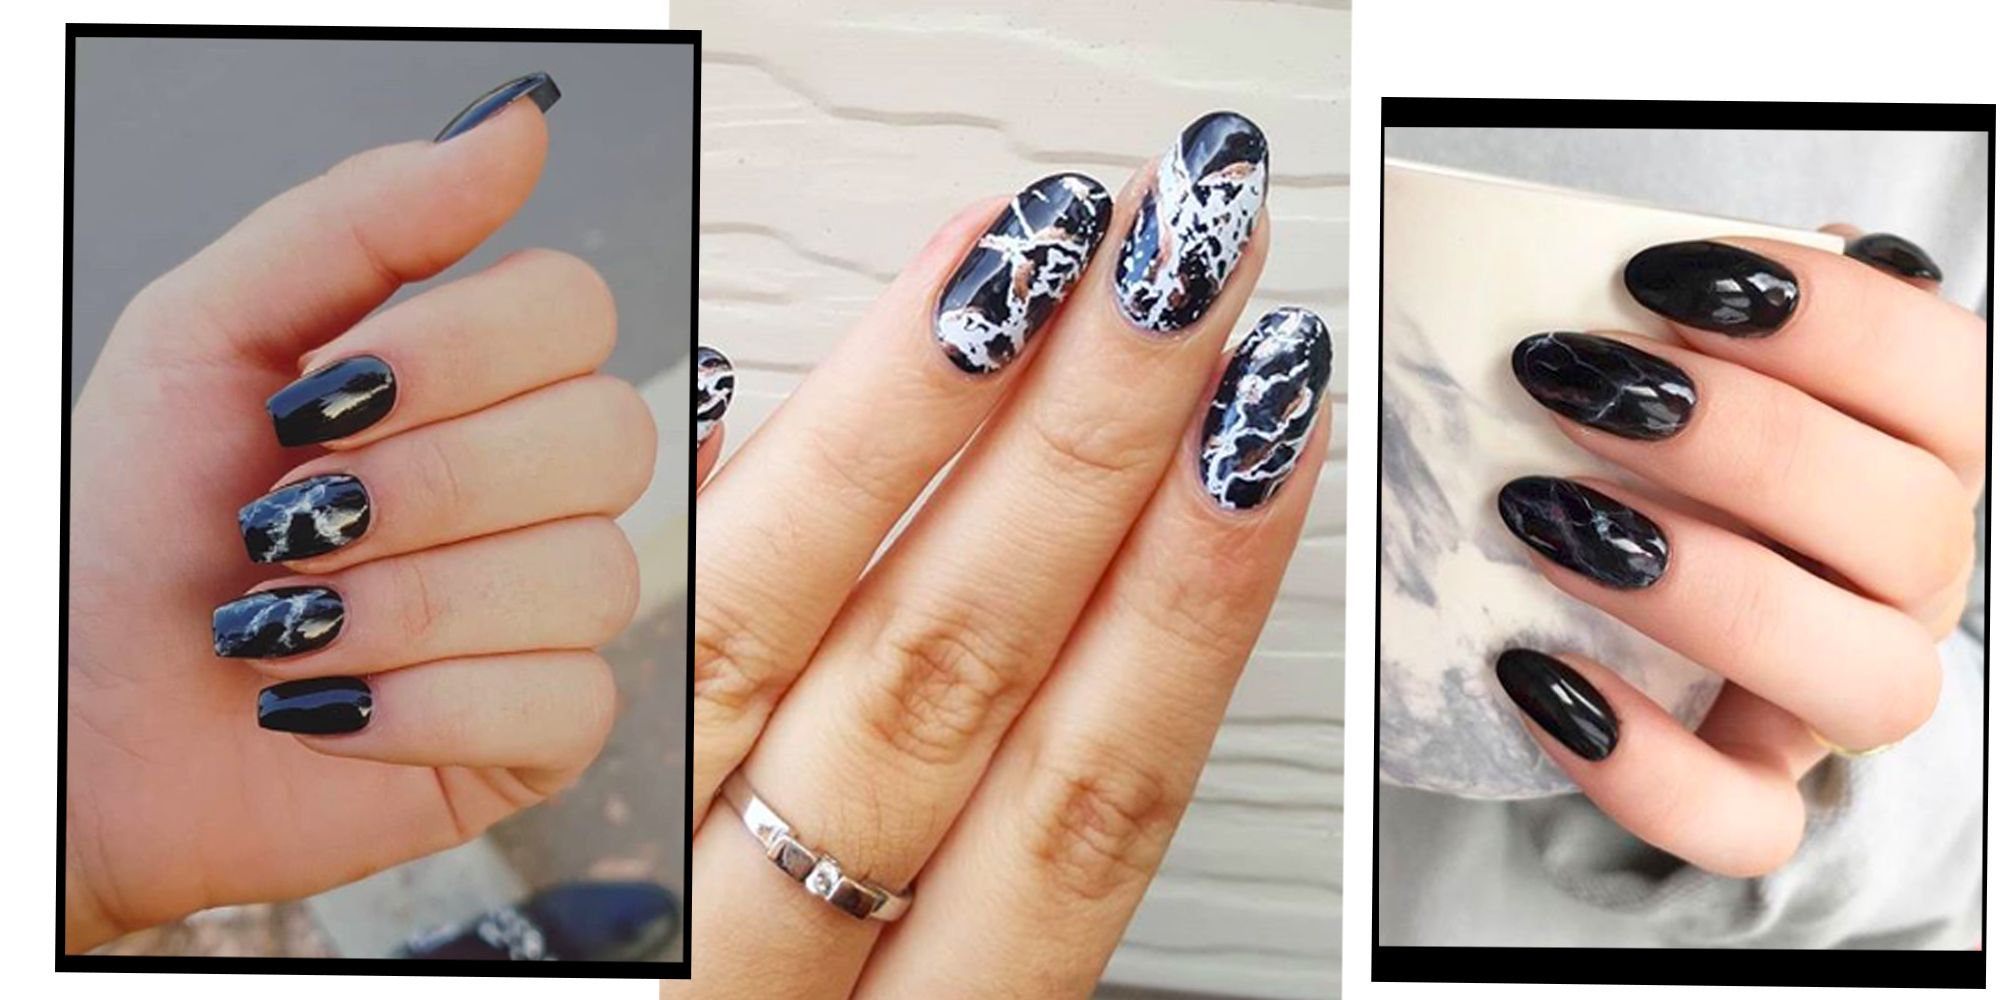 6. Marble Nail Art - wide 6